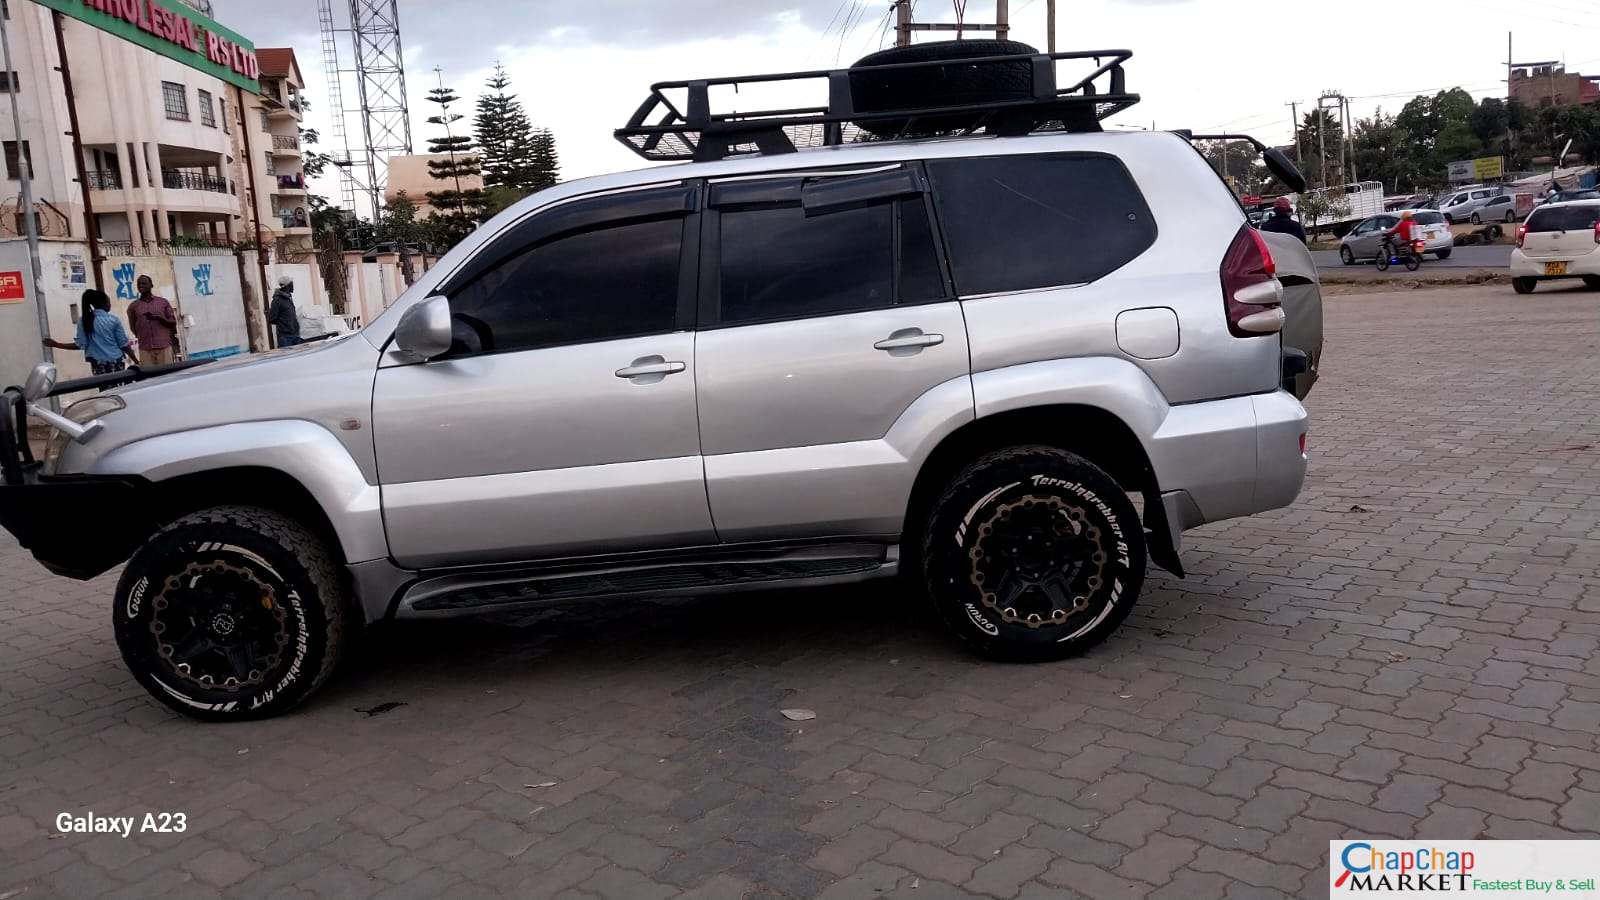 Toyota Prado J120 950k ONLY You Pay 40% Deposit INSTALLMENTS Trade in OK EXCLUSIVE hire purchase